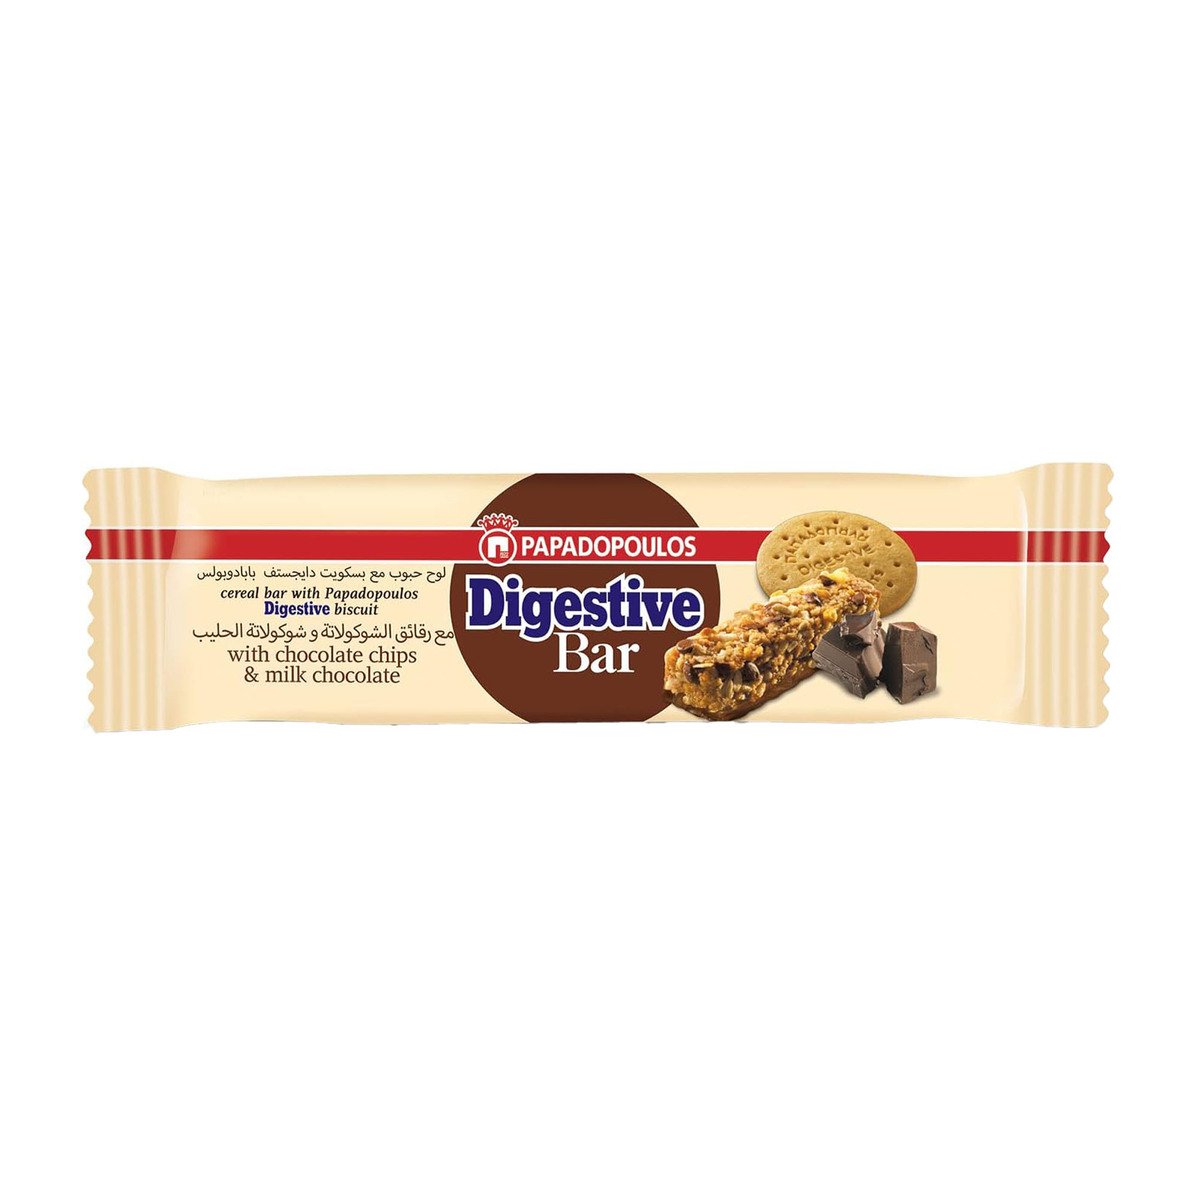 Papadopoulos Digestive Bar With Chocolate Chips & Milk Chocolate, 5 x 28 g